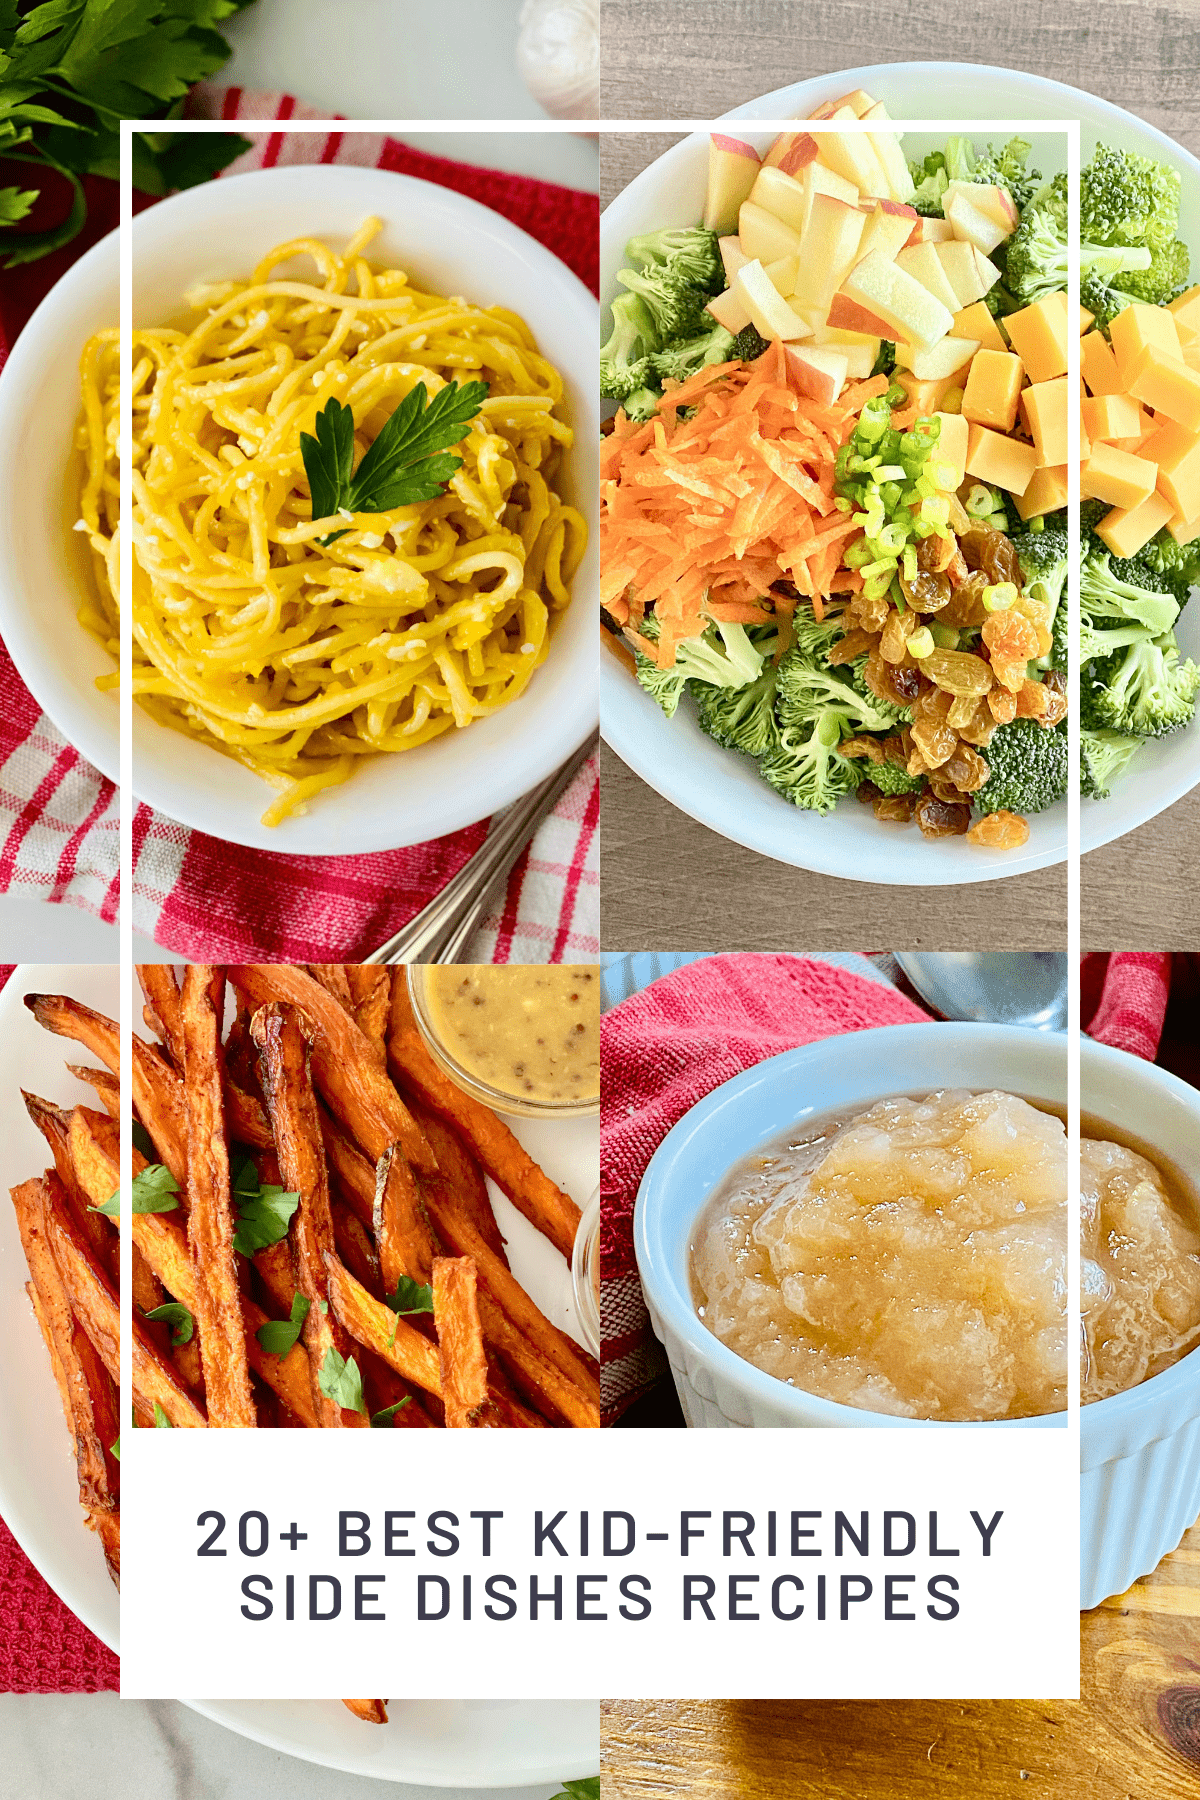 4 recipe images for fried spaghetti, broccoli salad, homemade apple sauce and sweet potato fries.